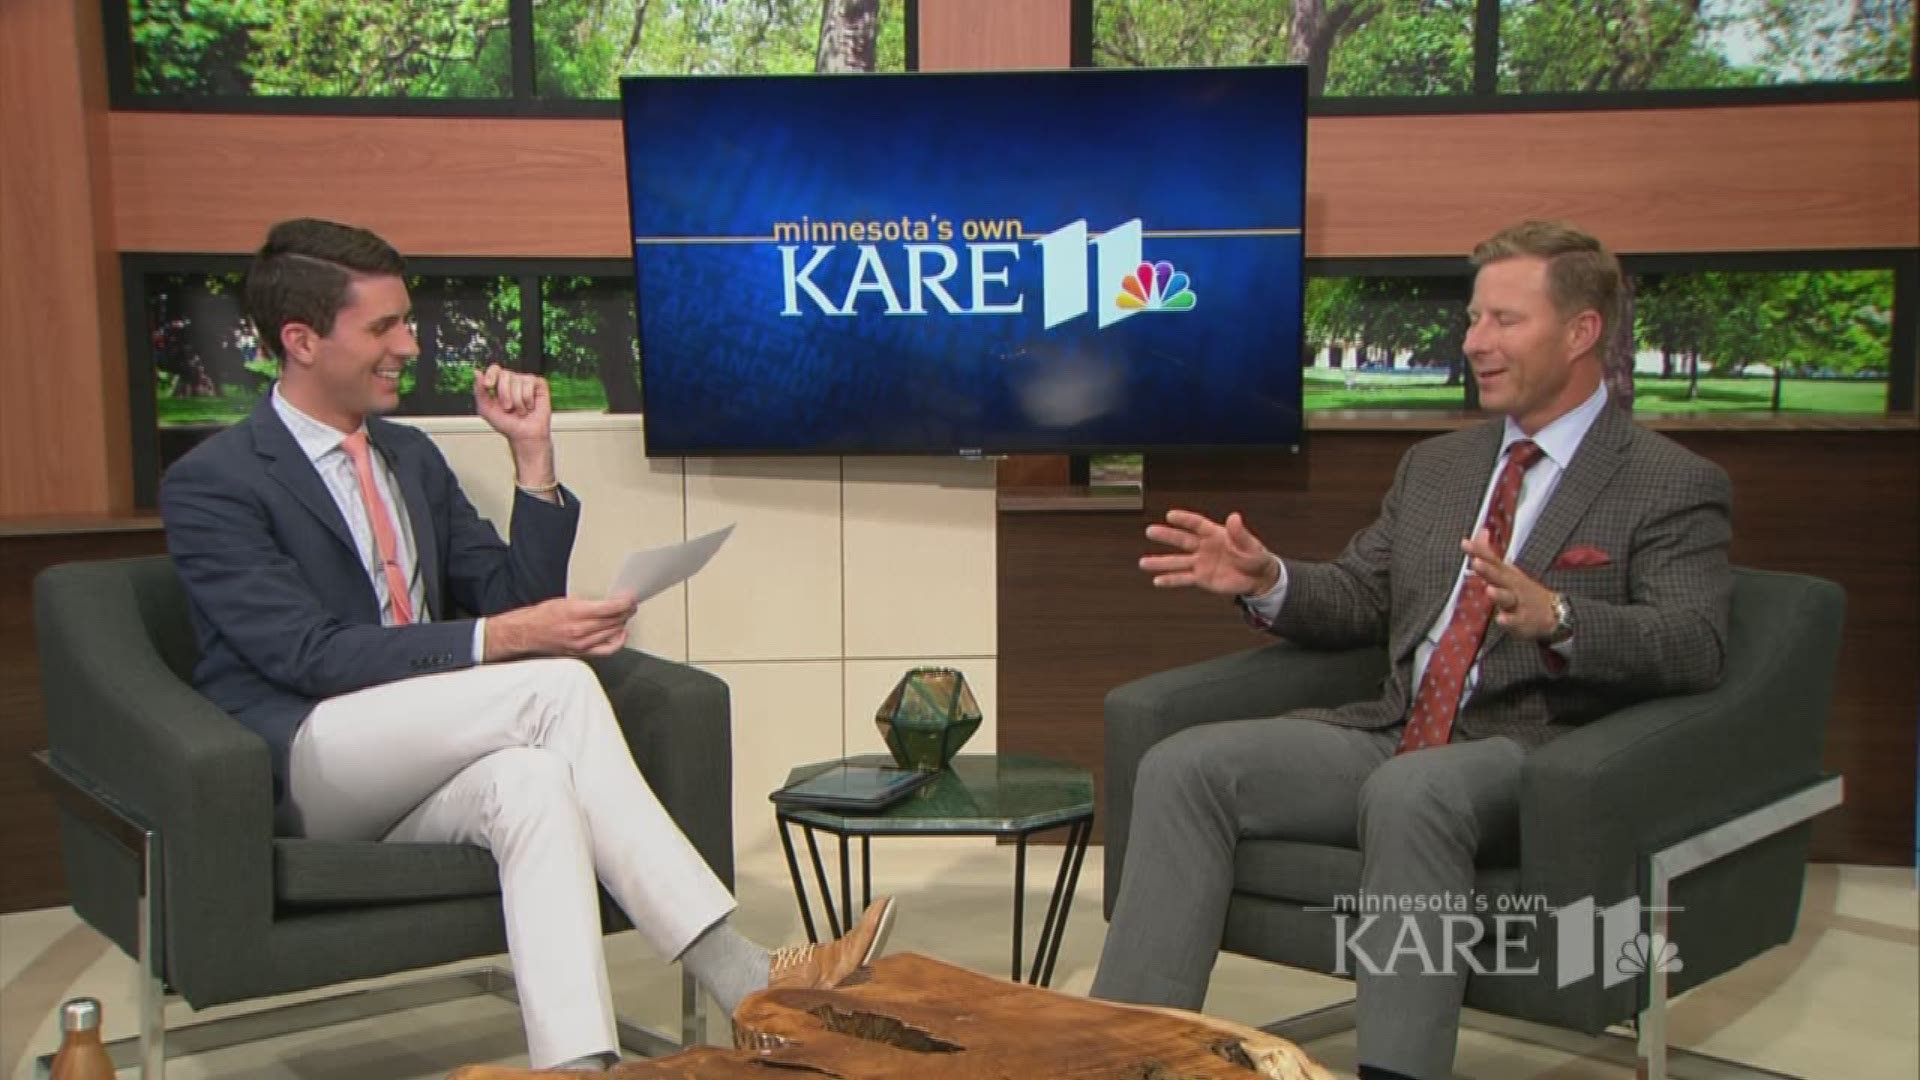 Justin Halverson with Great Waters Financial stopped by the KARE 11 News at 4 to bust the top 5 myths surrounding Social Security. http://kare11.tv/2fwsS4o